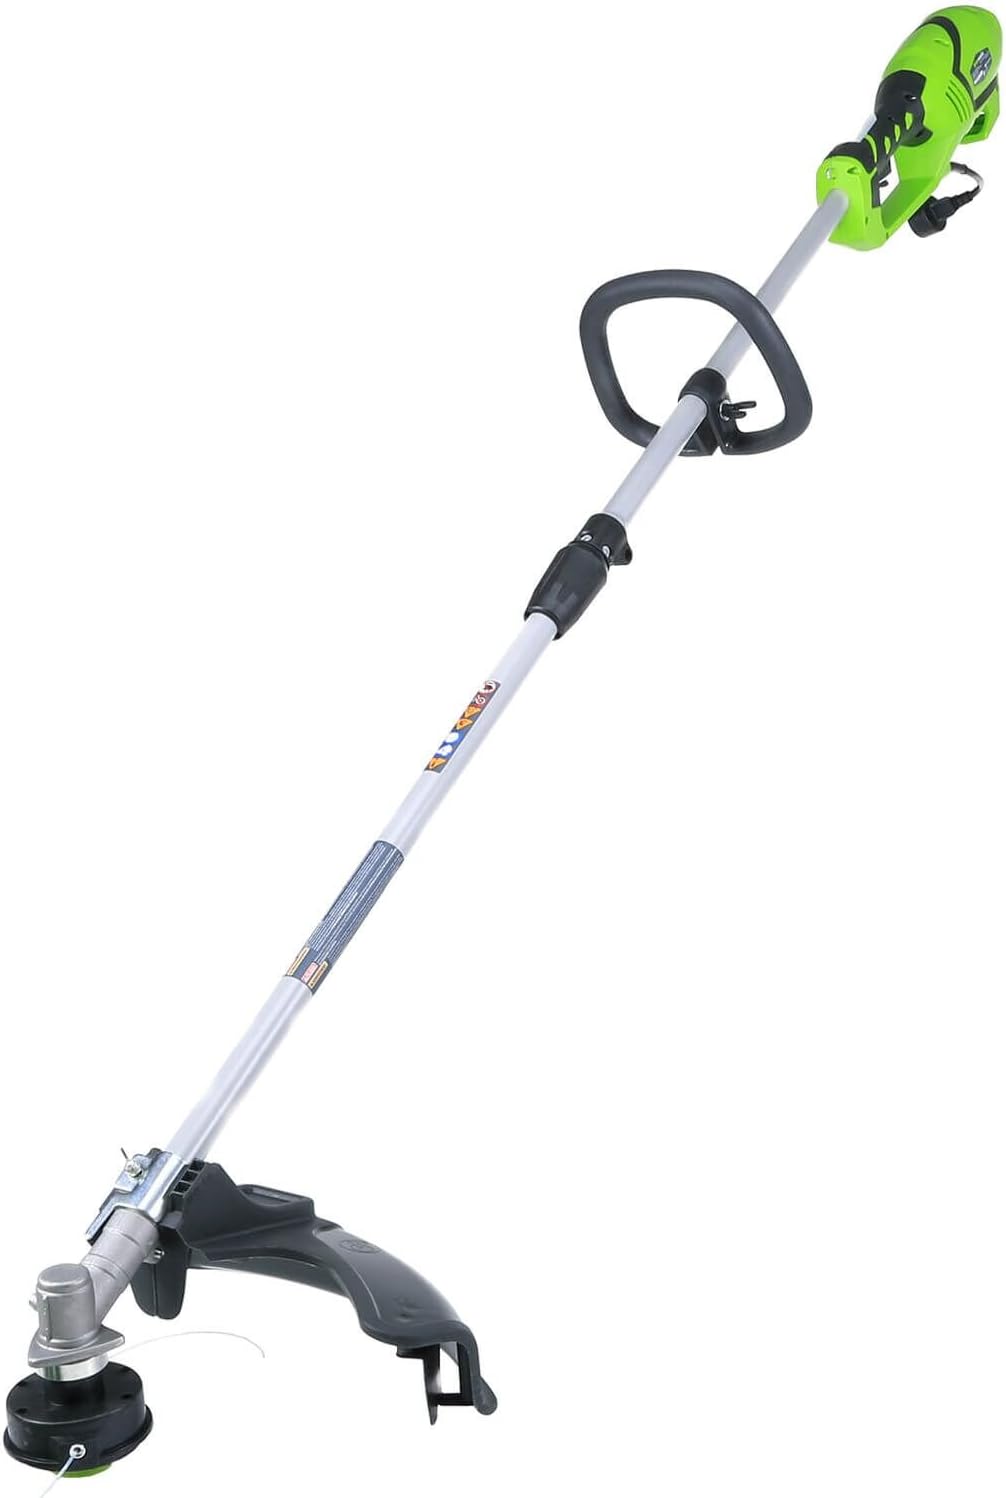 Greenworks 18" Corded Electric 10 Amp Attachment Capable String Trimmer 21142VT - image 1 of 6